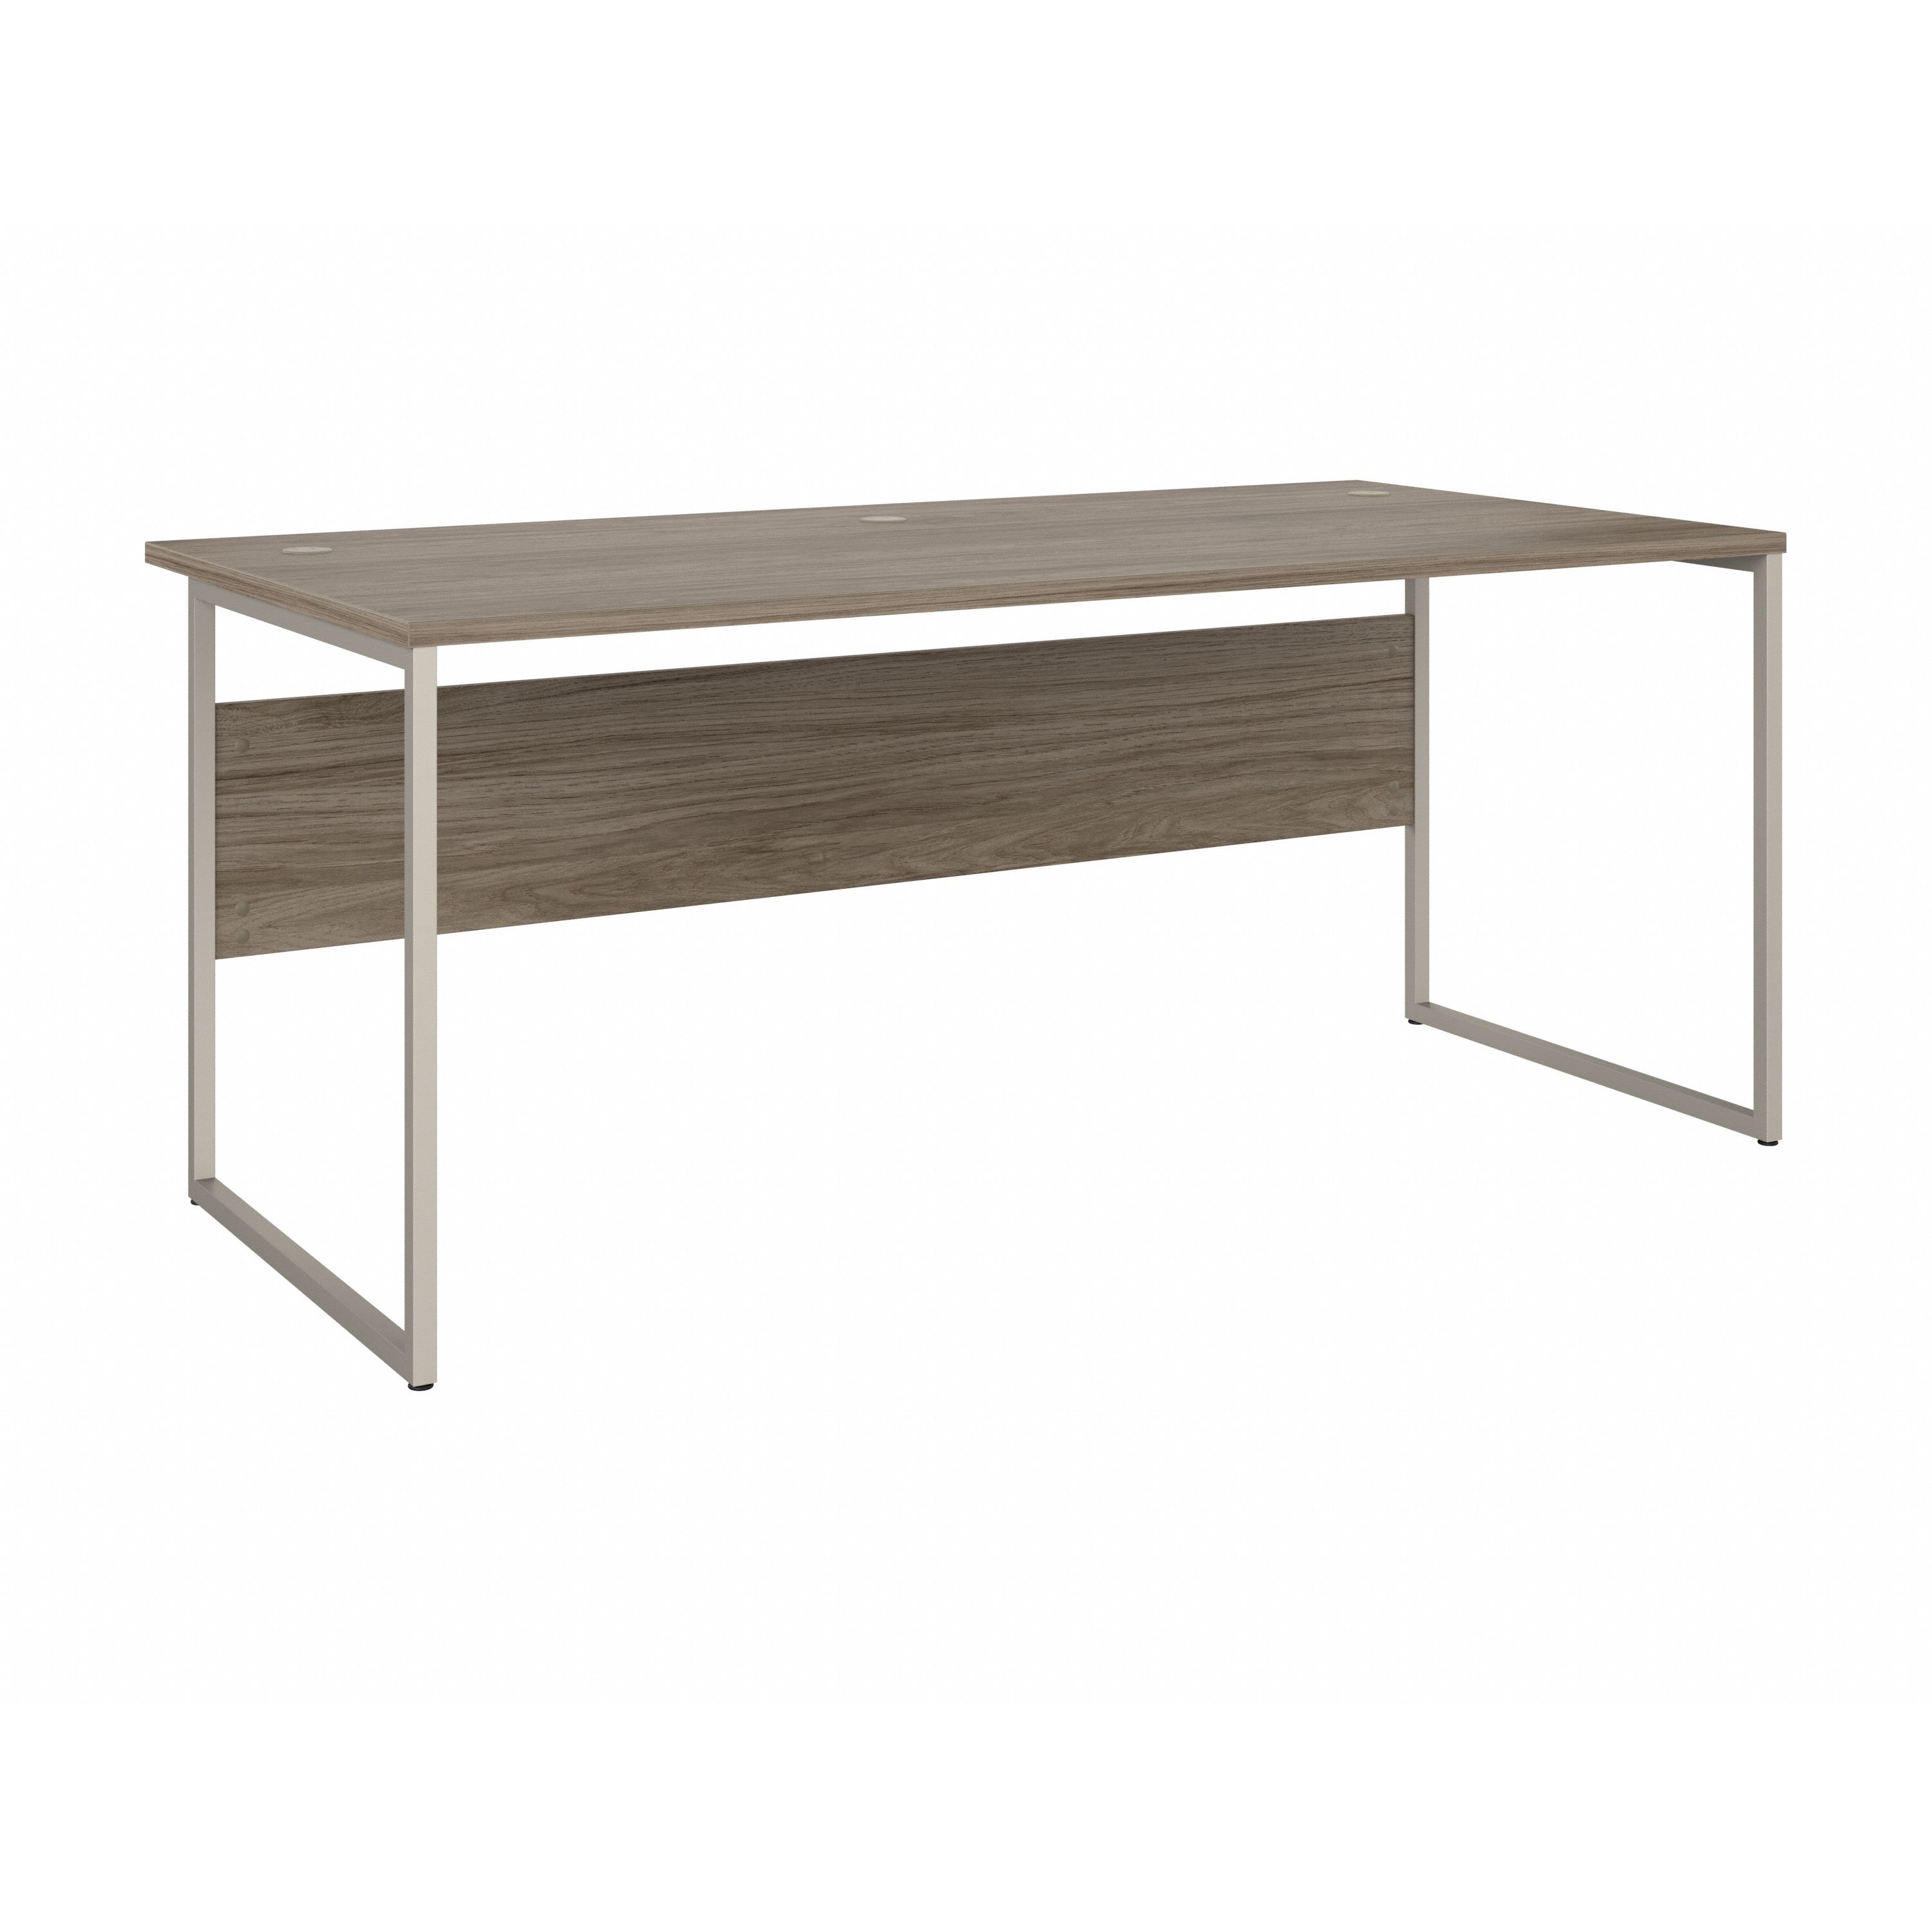 Shop Bush Business Furniture Hybrid 72W x 36D Computer Table Desk with Metal Legs 02 HYD172MH #color_modern hickory